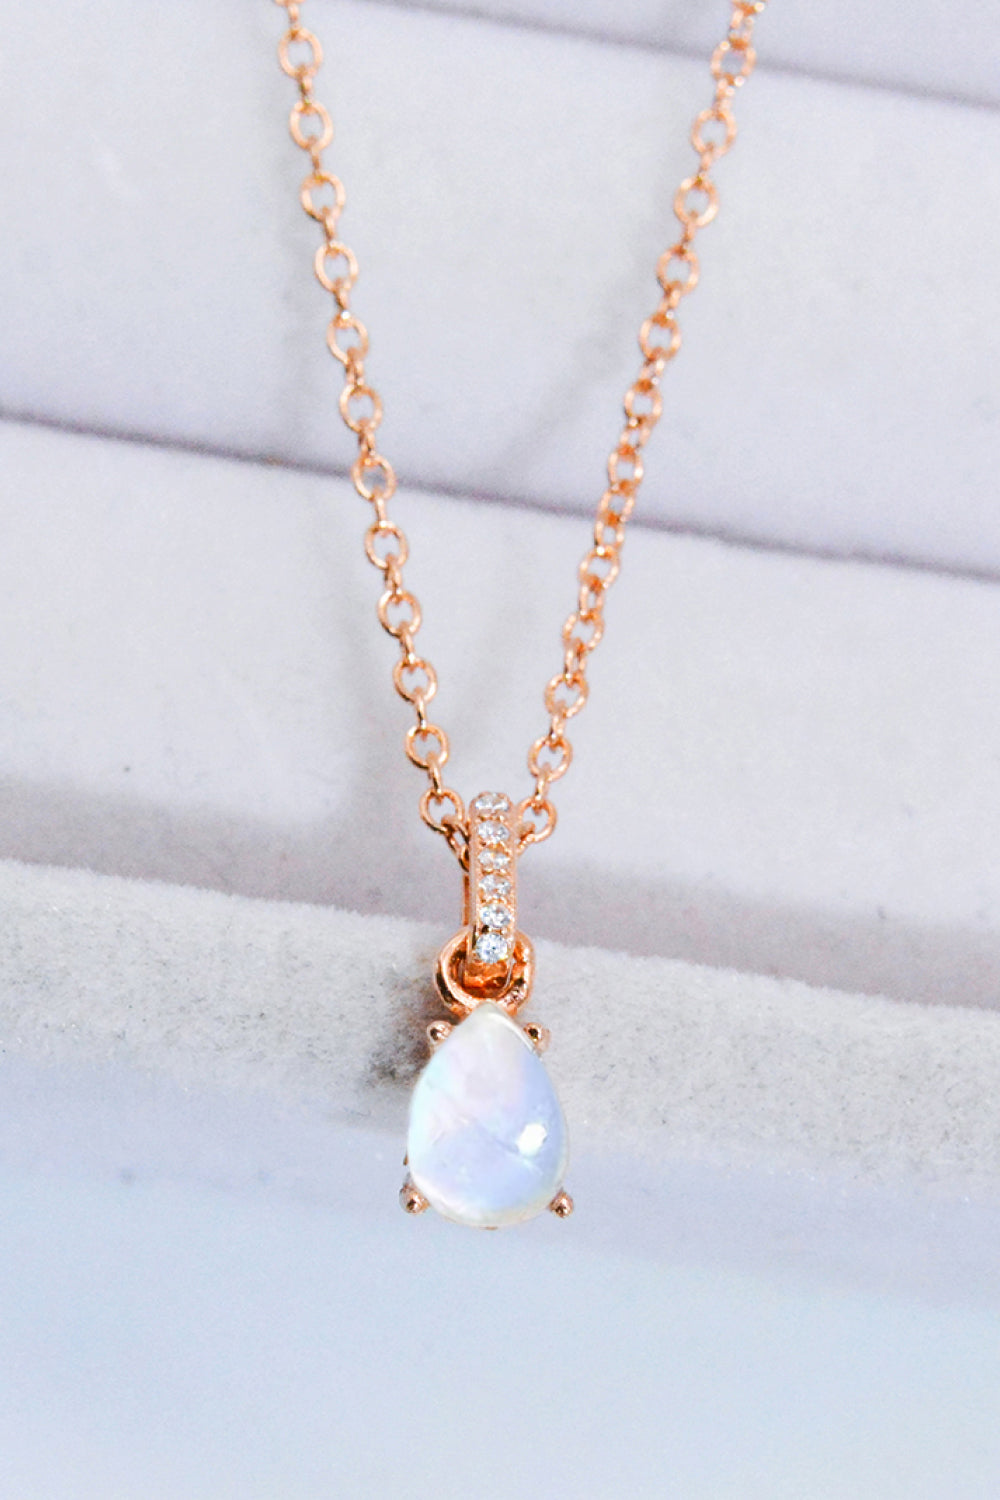 Moonstone Teardrop Pendant Necklace - Cheeky Chic Boutique